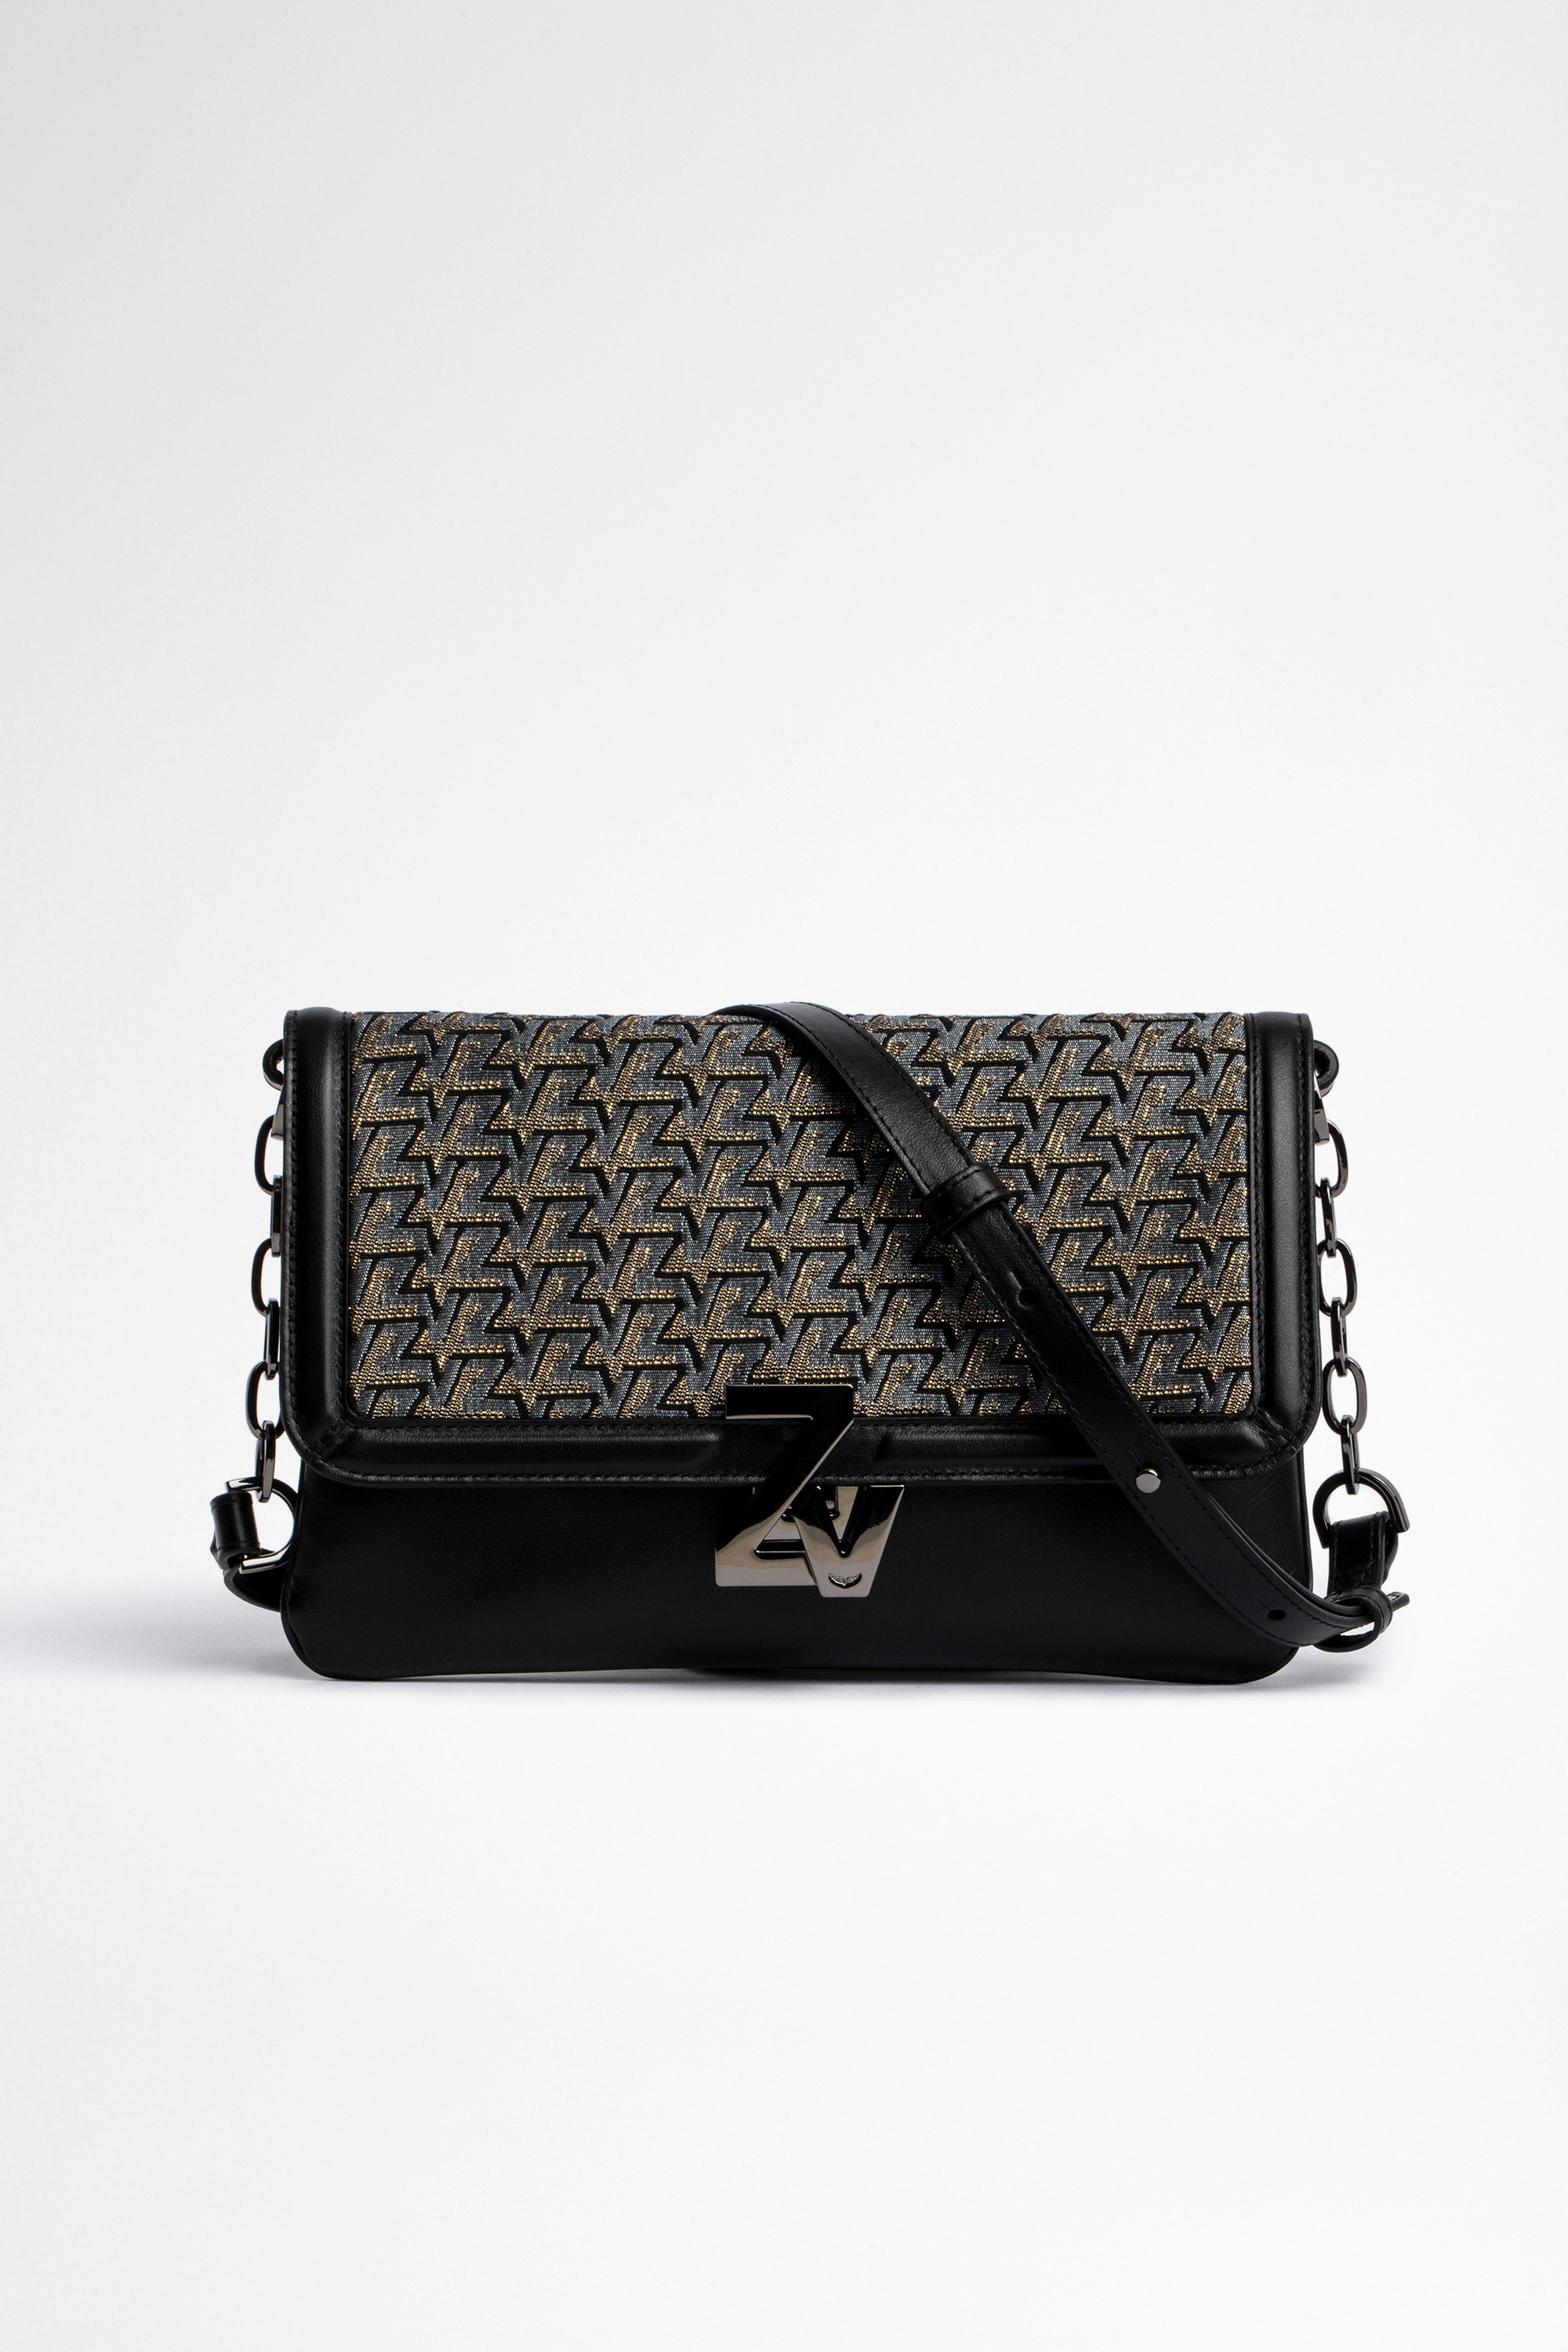 ZV Initiale La Clutch Bag Women's clutch bag in leather and ZV street jacquard